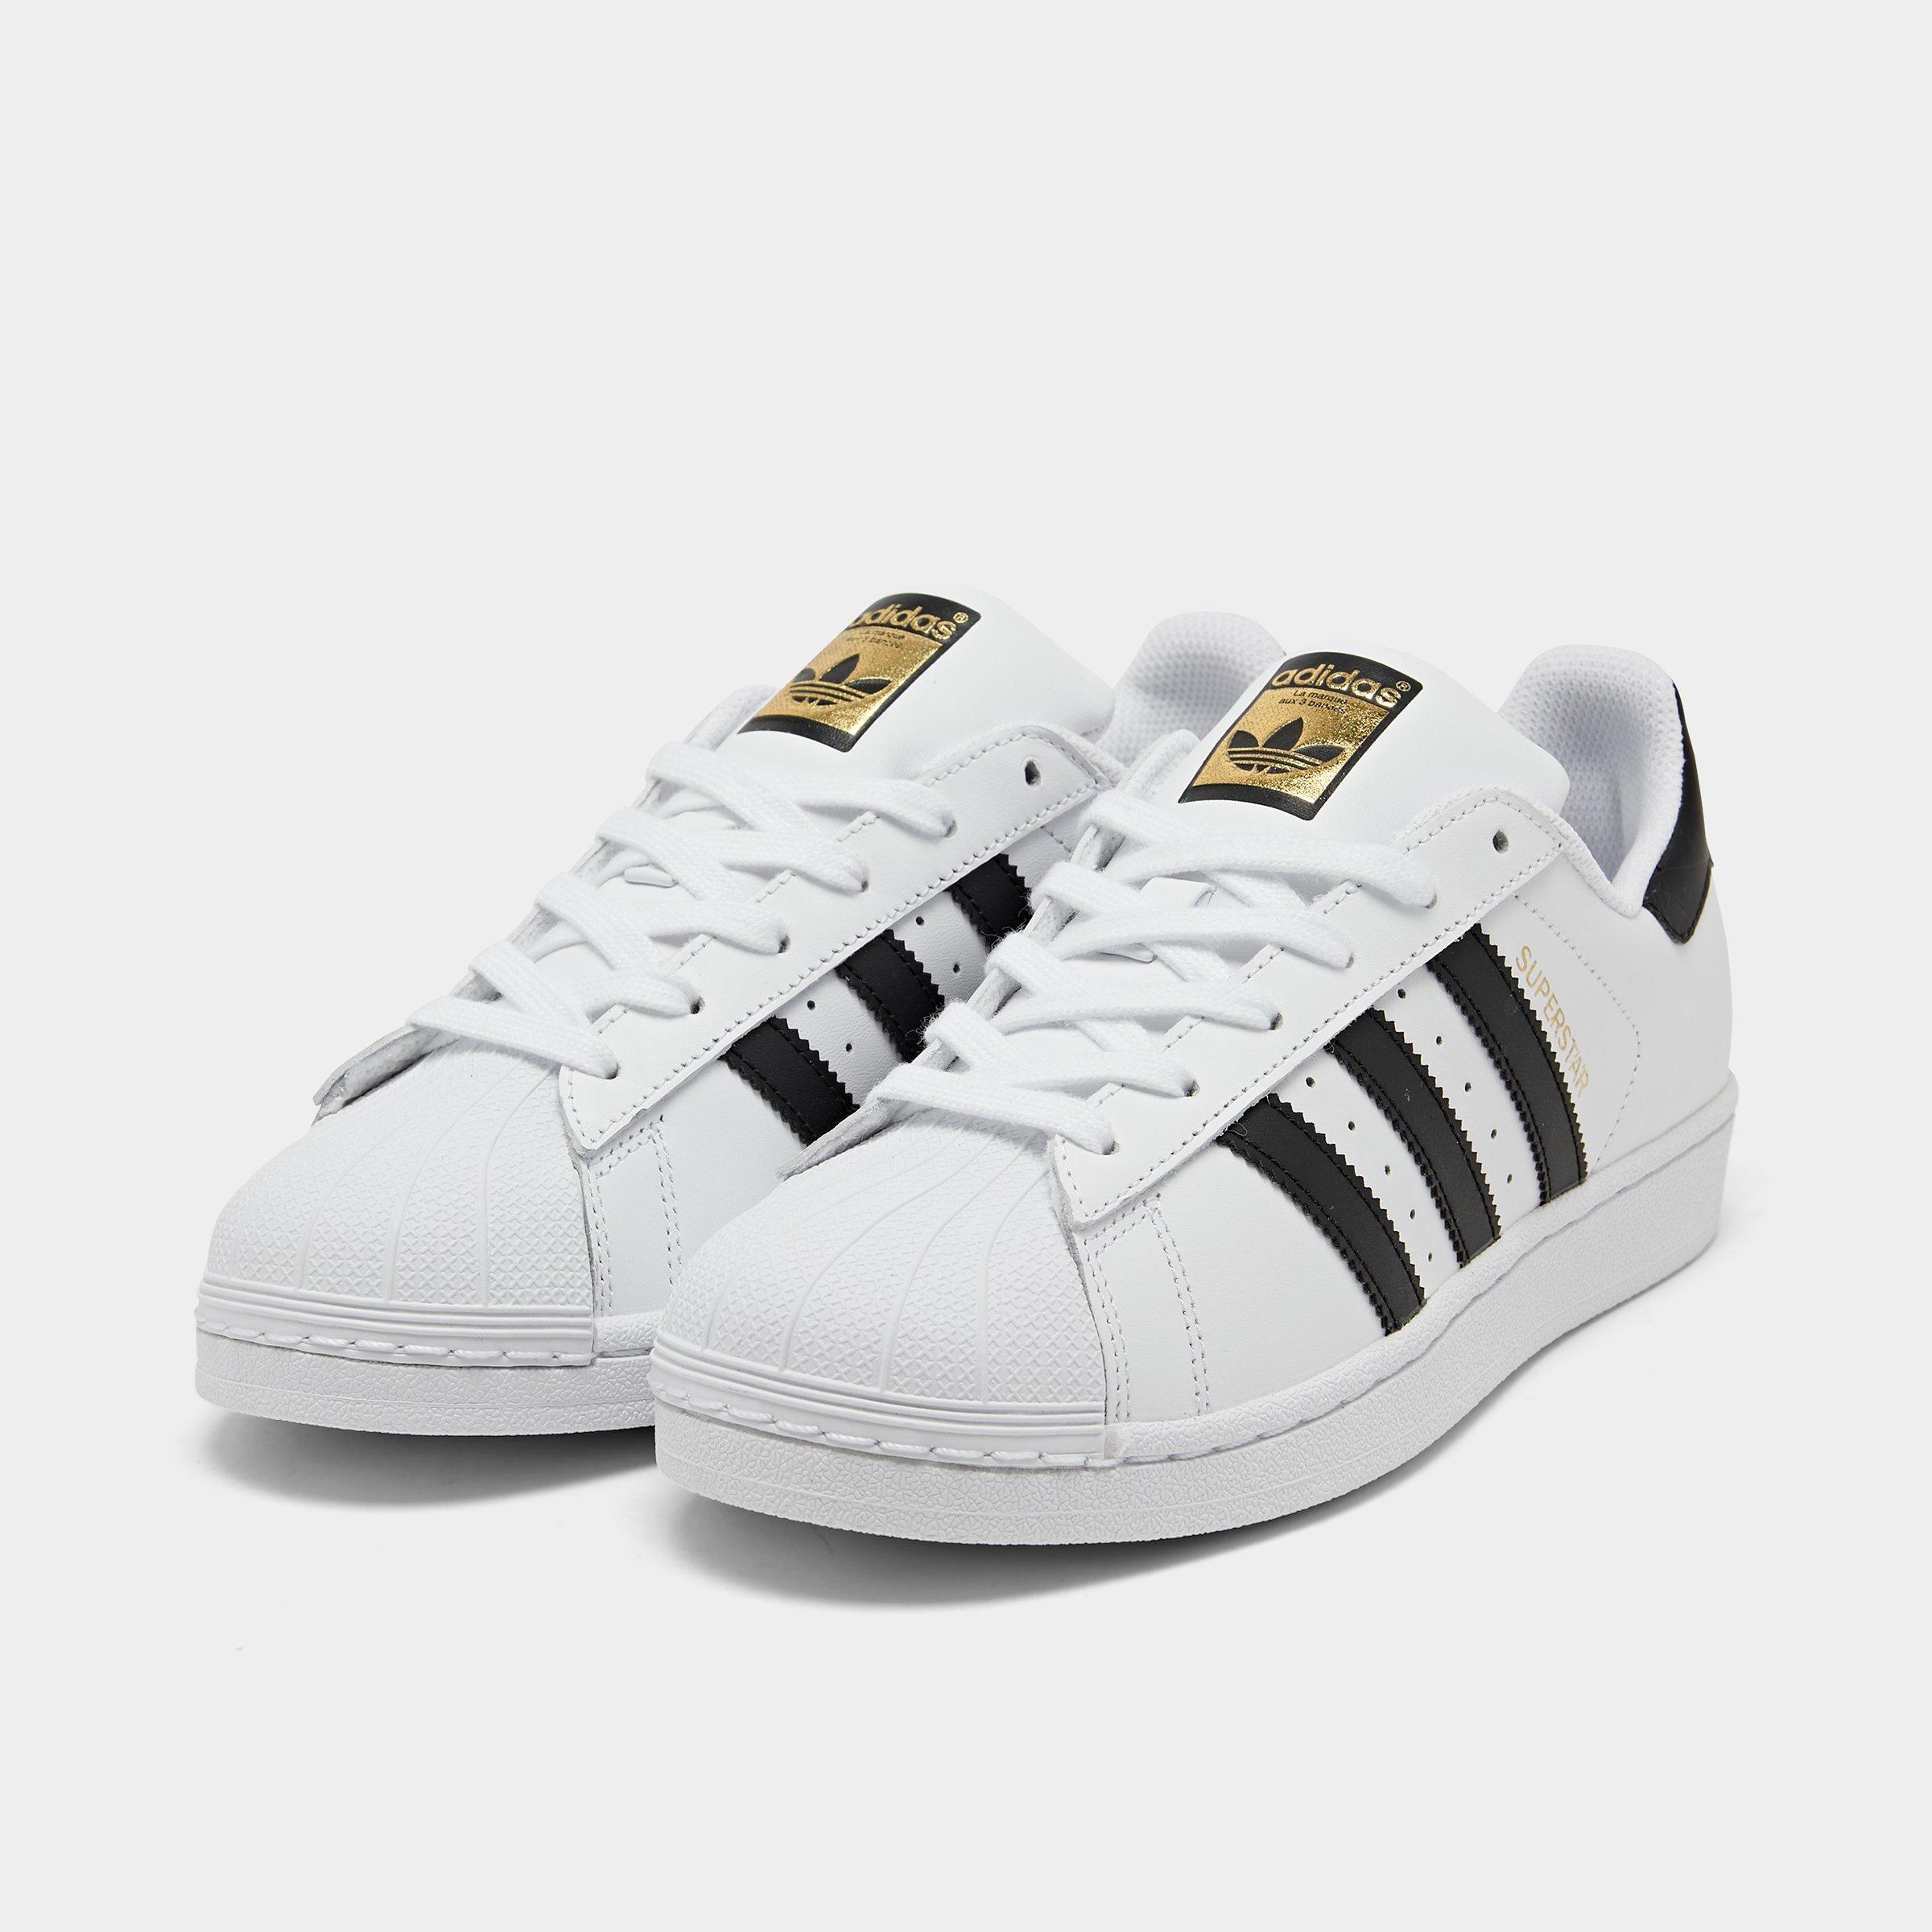 adidas women's superstar casual sneakers from finish line